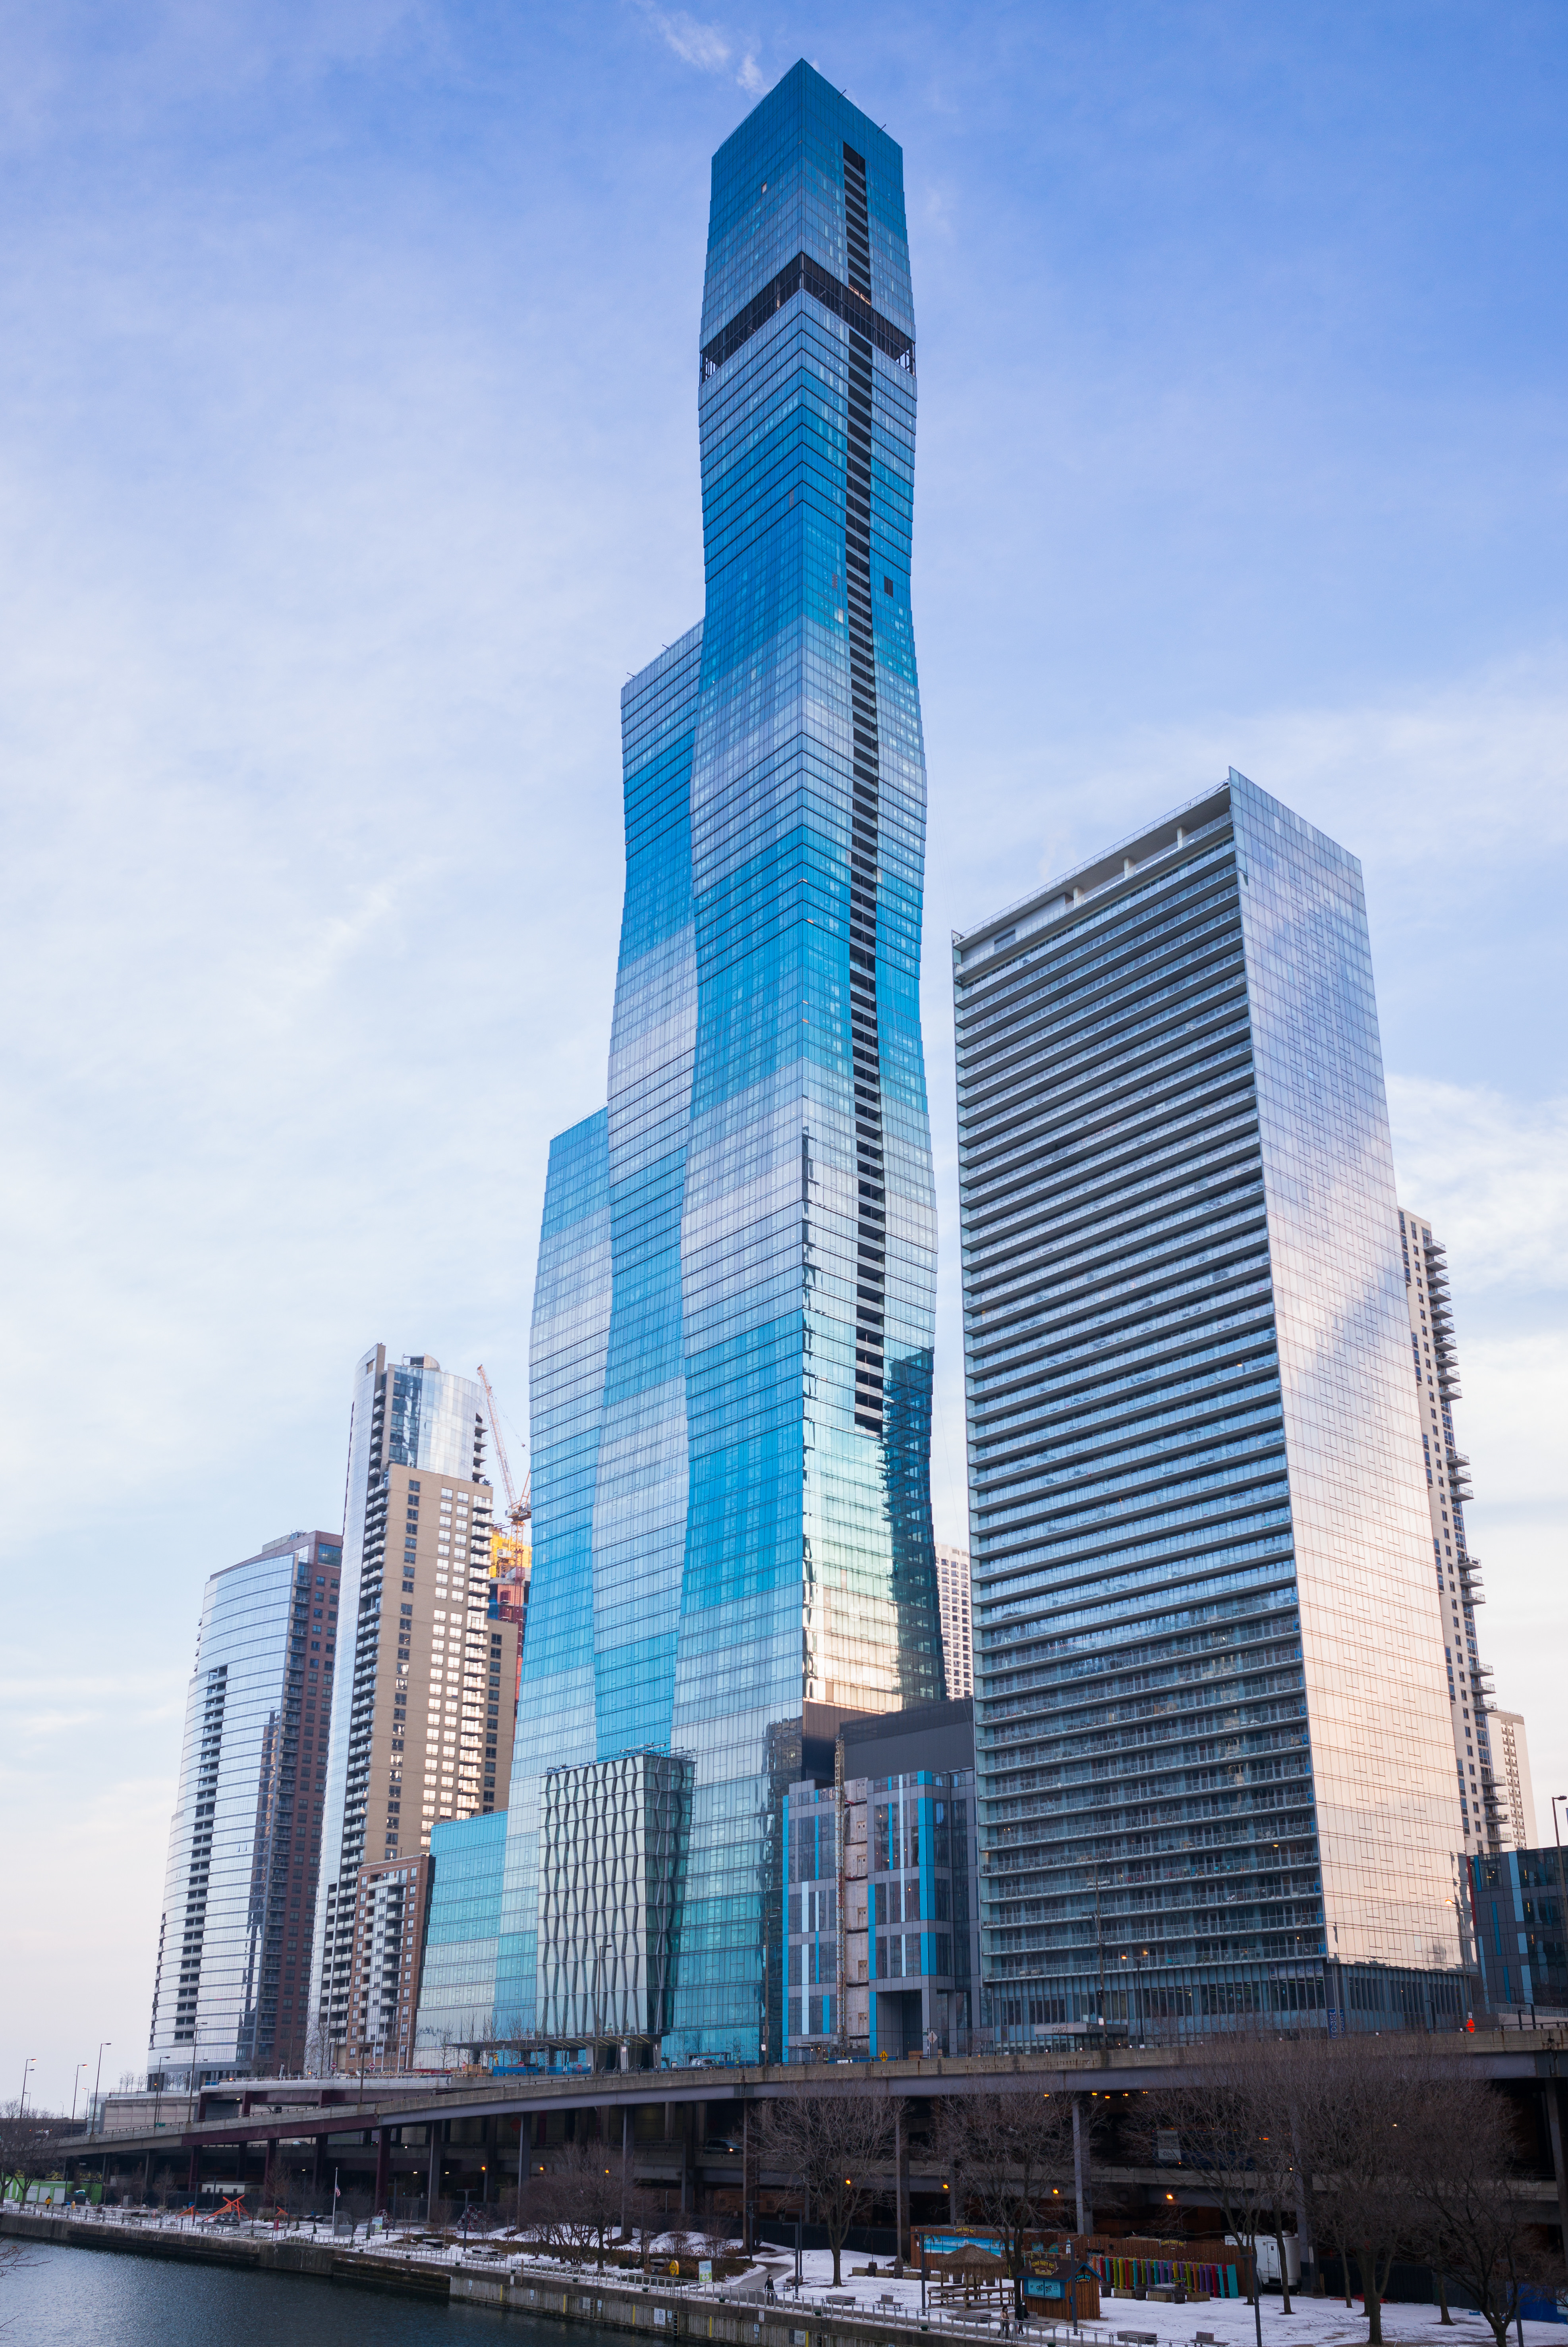 usa, chicago, architecture, cities, city, building, skyscrapers, united states